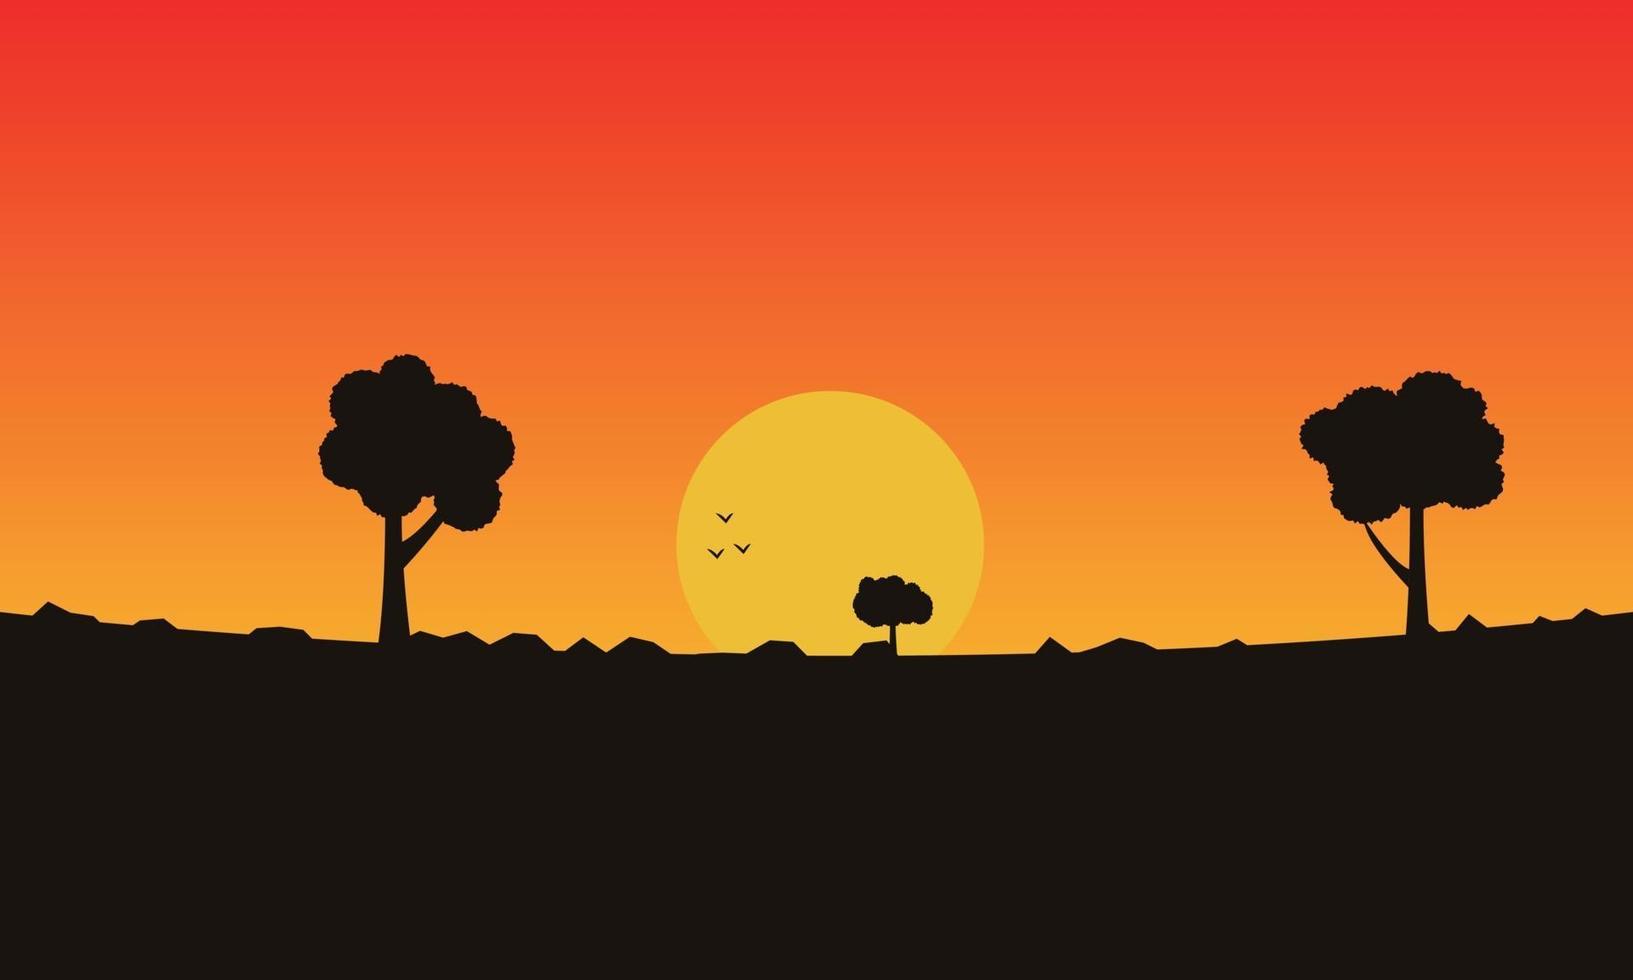 silhouette of a tree in sunset landscape vector